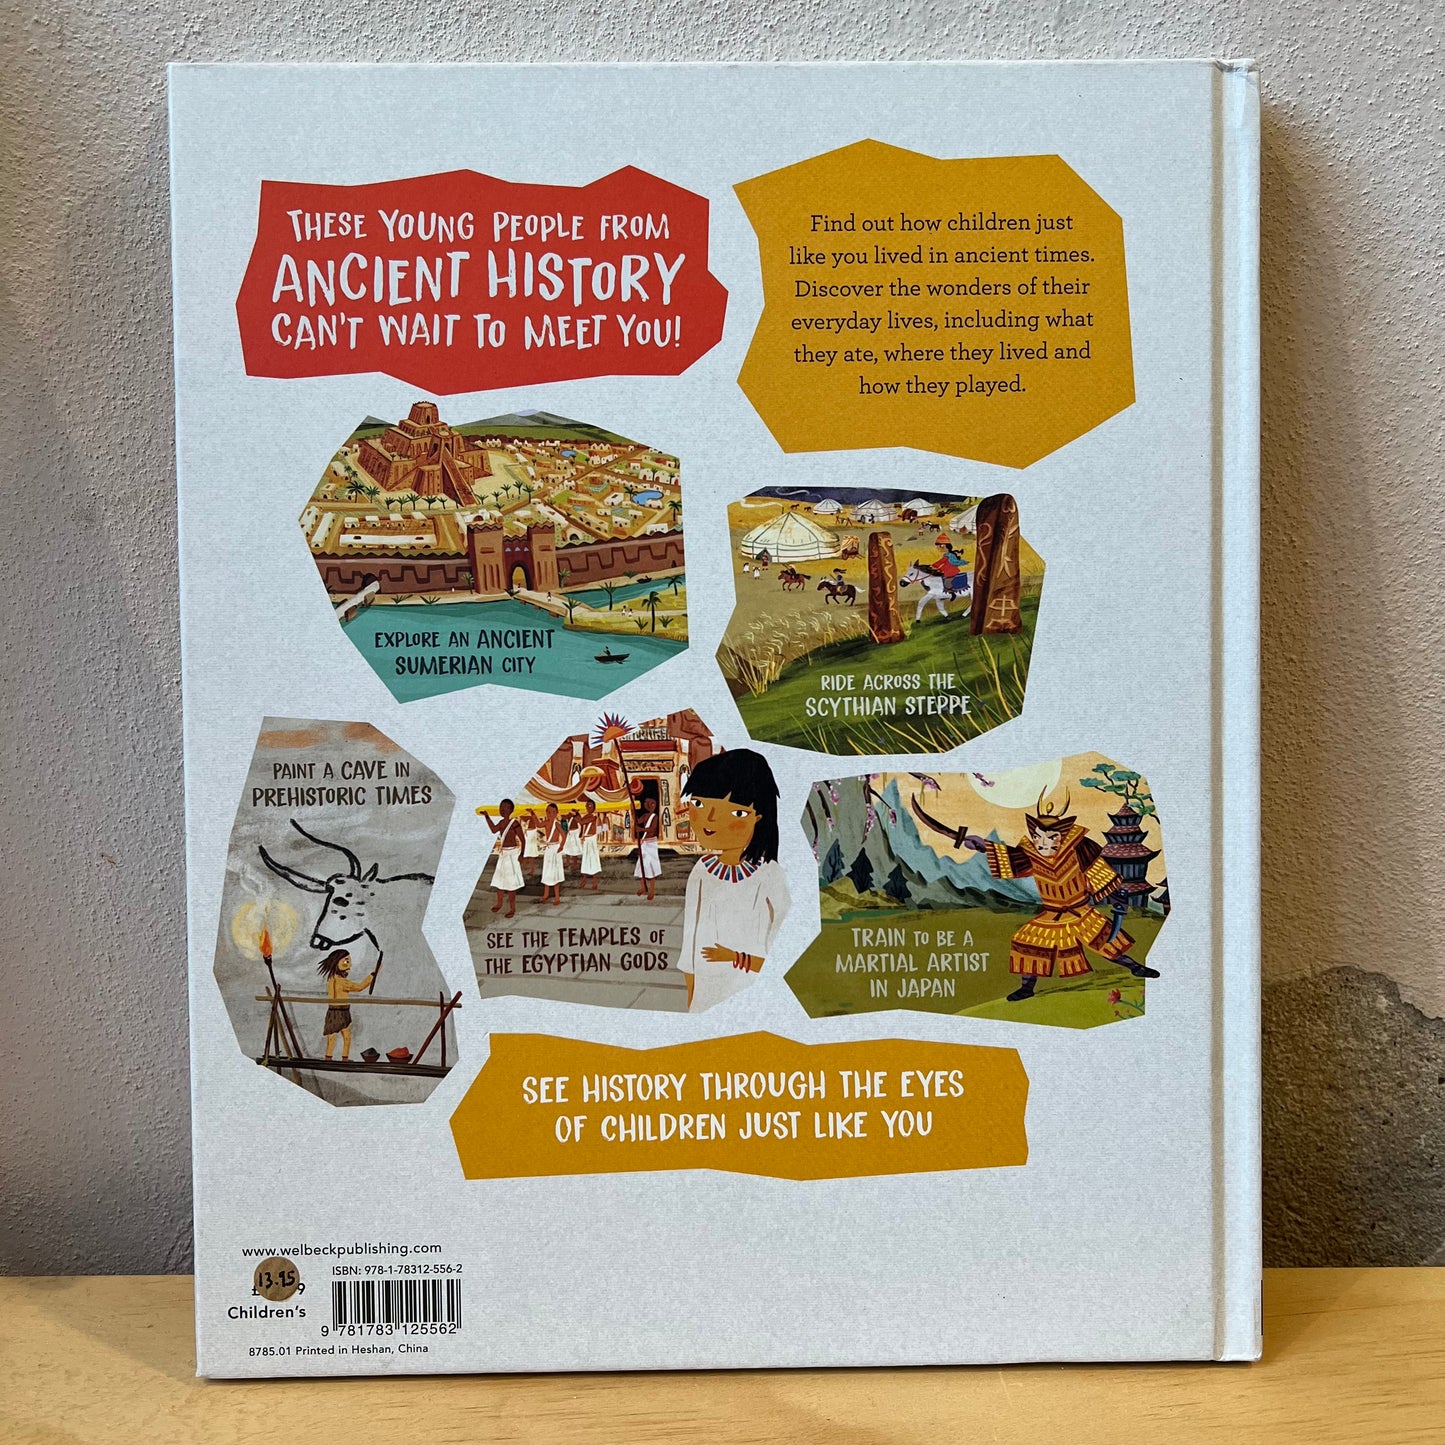 How We Lived In Ancient Times – Ben Hubbard, Christiane Engel